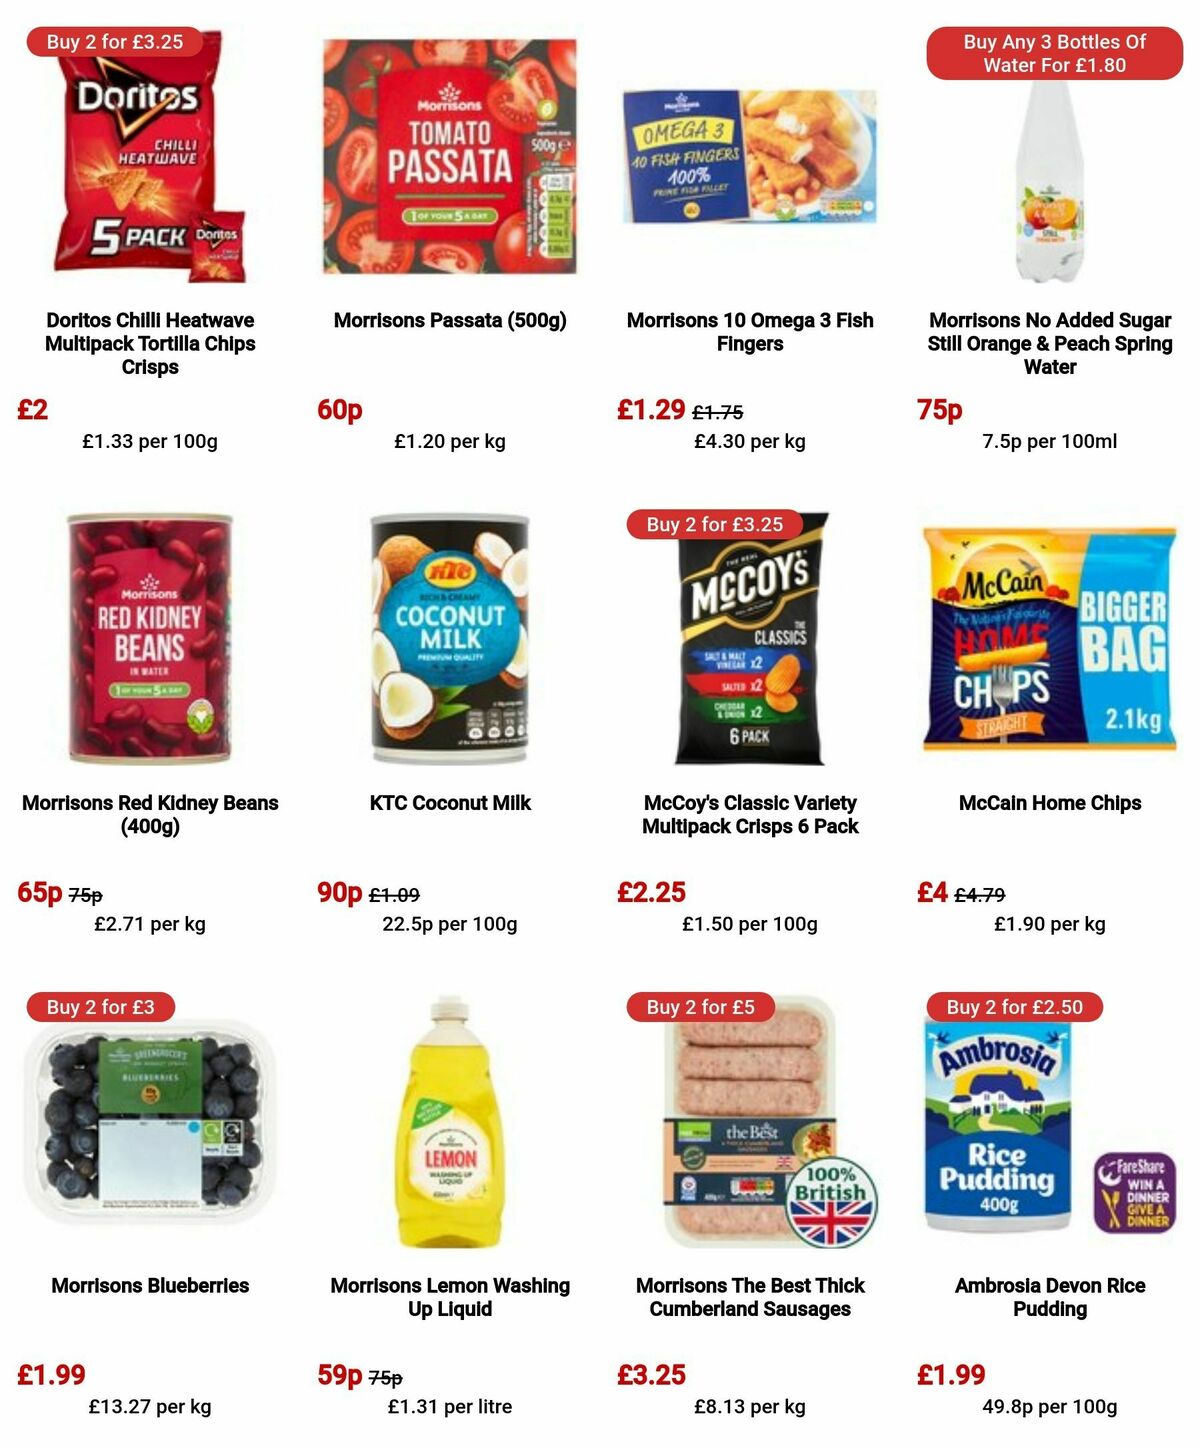 Morrisons Offers from 30 January